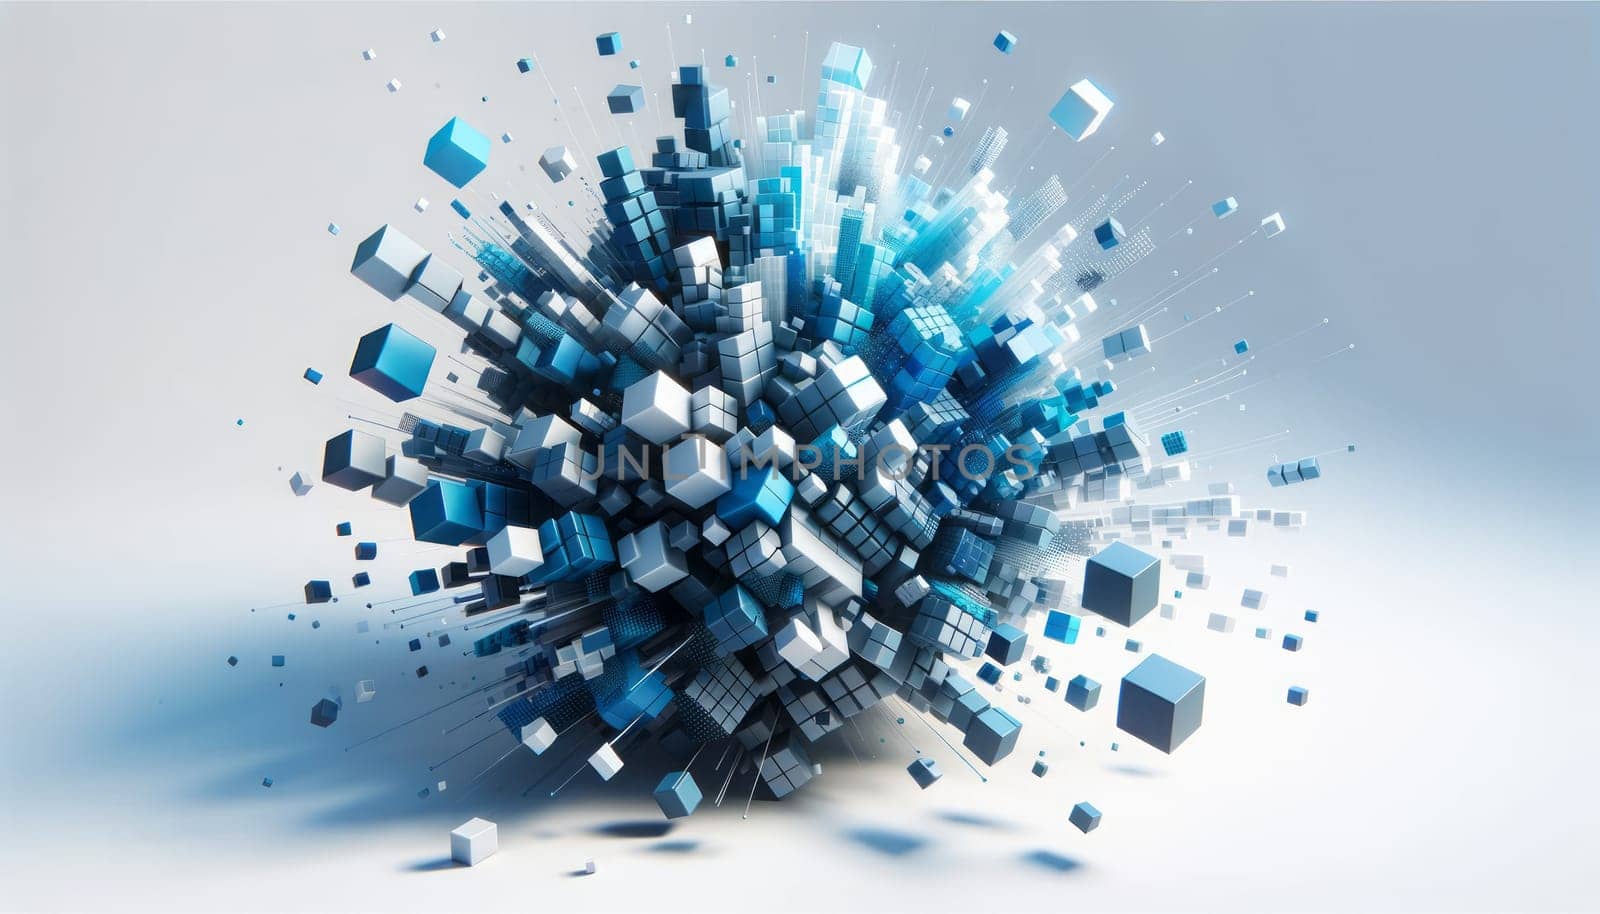 A wide digital illustration of a dynamic and abstract composition of 3D cubes. The cubes are predominantly in various shades of blue, ranging from light sky blue to deep navy. They are arranged in a cluster that looks like an explosion from one corner of the image, creating a sense of movement towards the white background. The composition has a modern and digital feel, with a depth of field effect that blurs some cubes and brings others into sharp focus, highlighting the geometric shapes and the play of light and shadow on their surfaces.